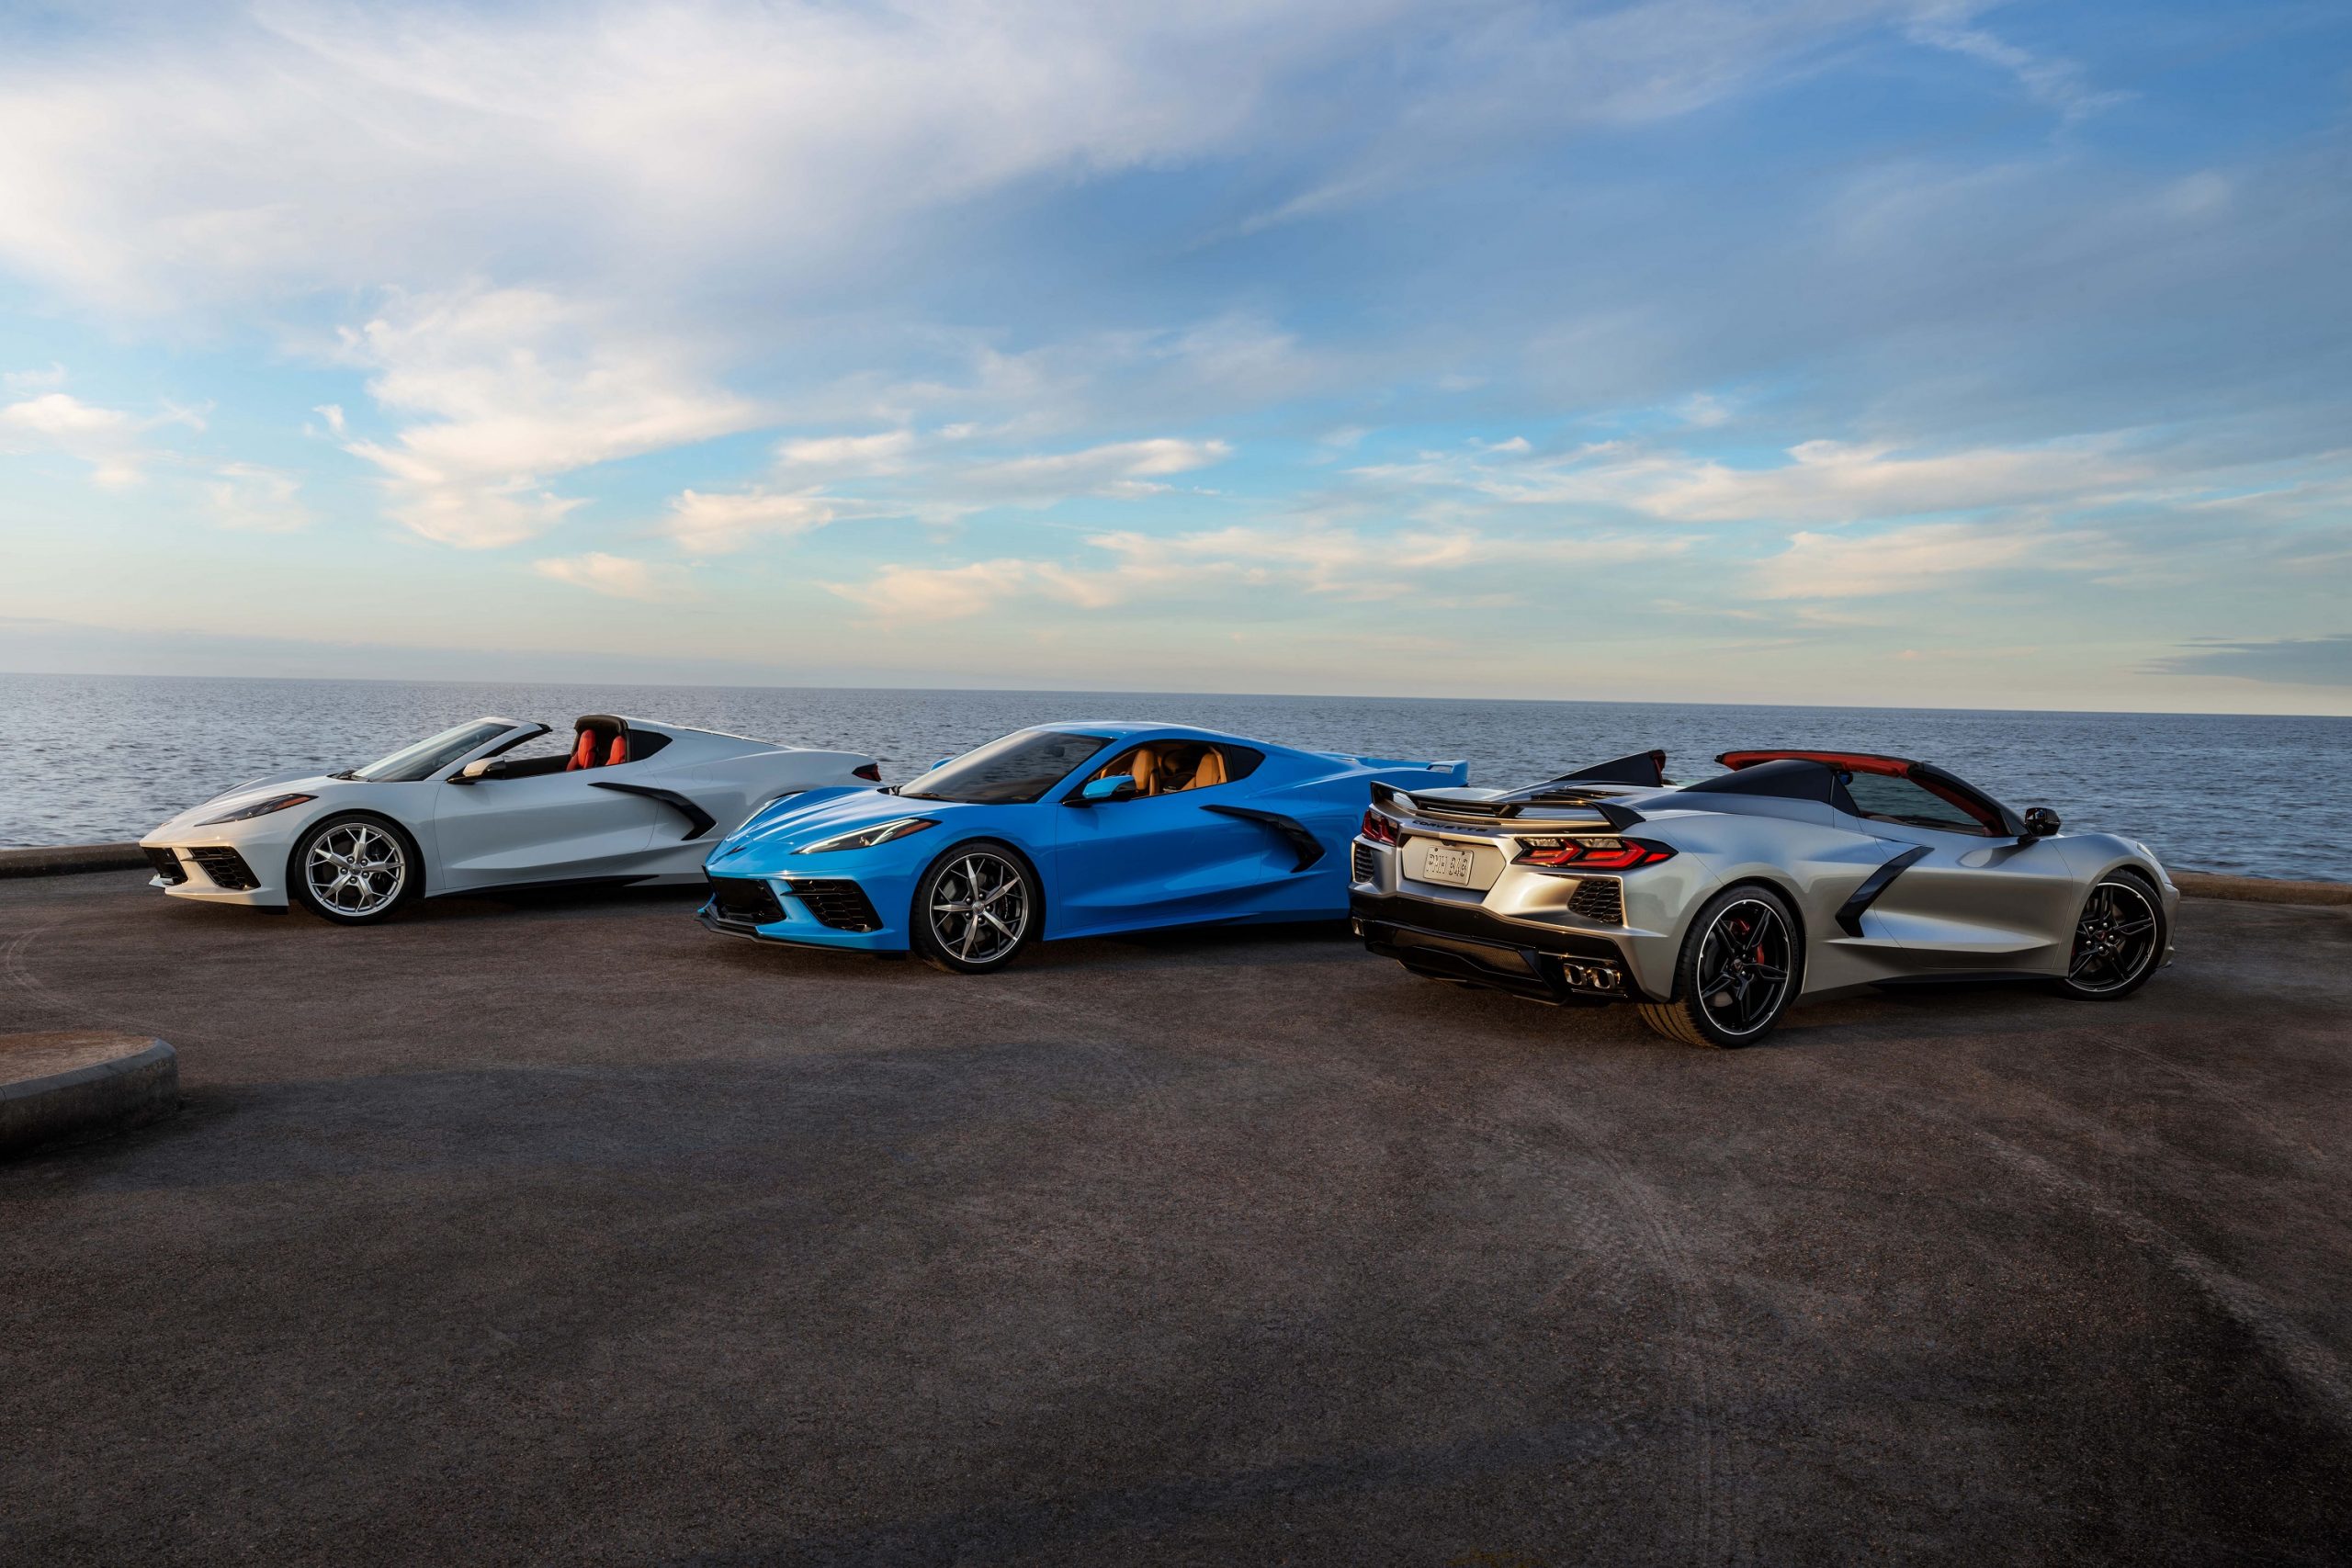 The current Chevy Corvette lineup, from coupe to convertible to targa, shot in profile